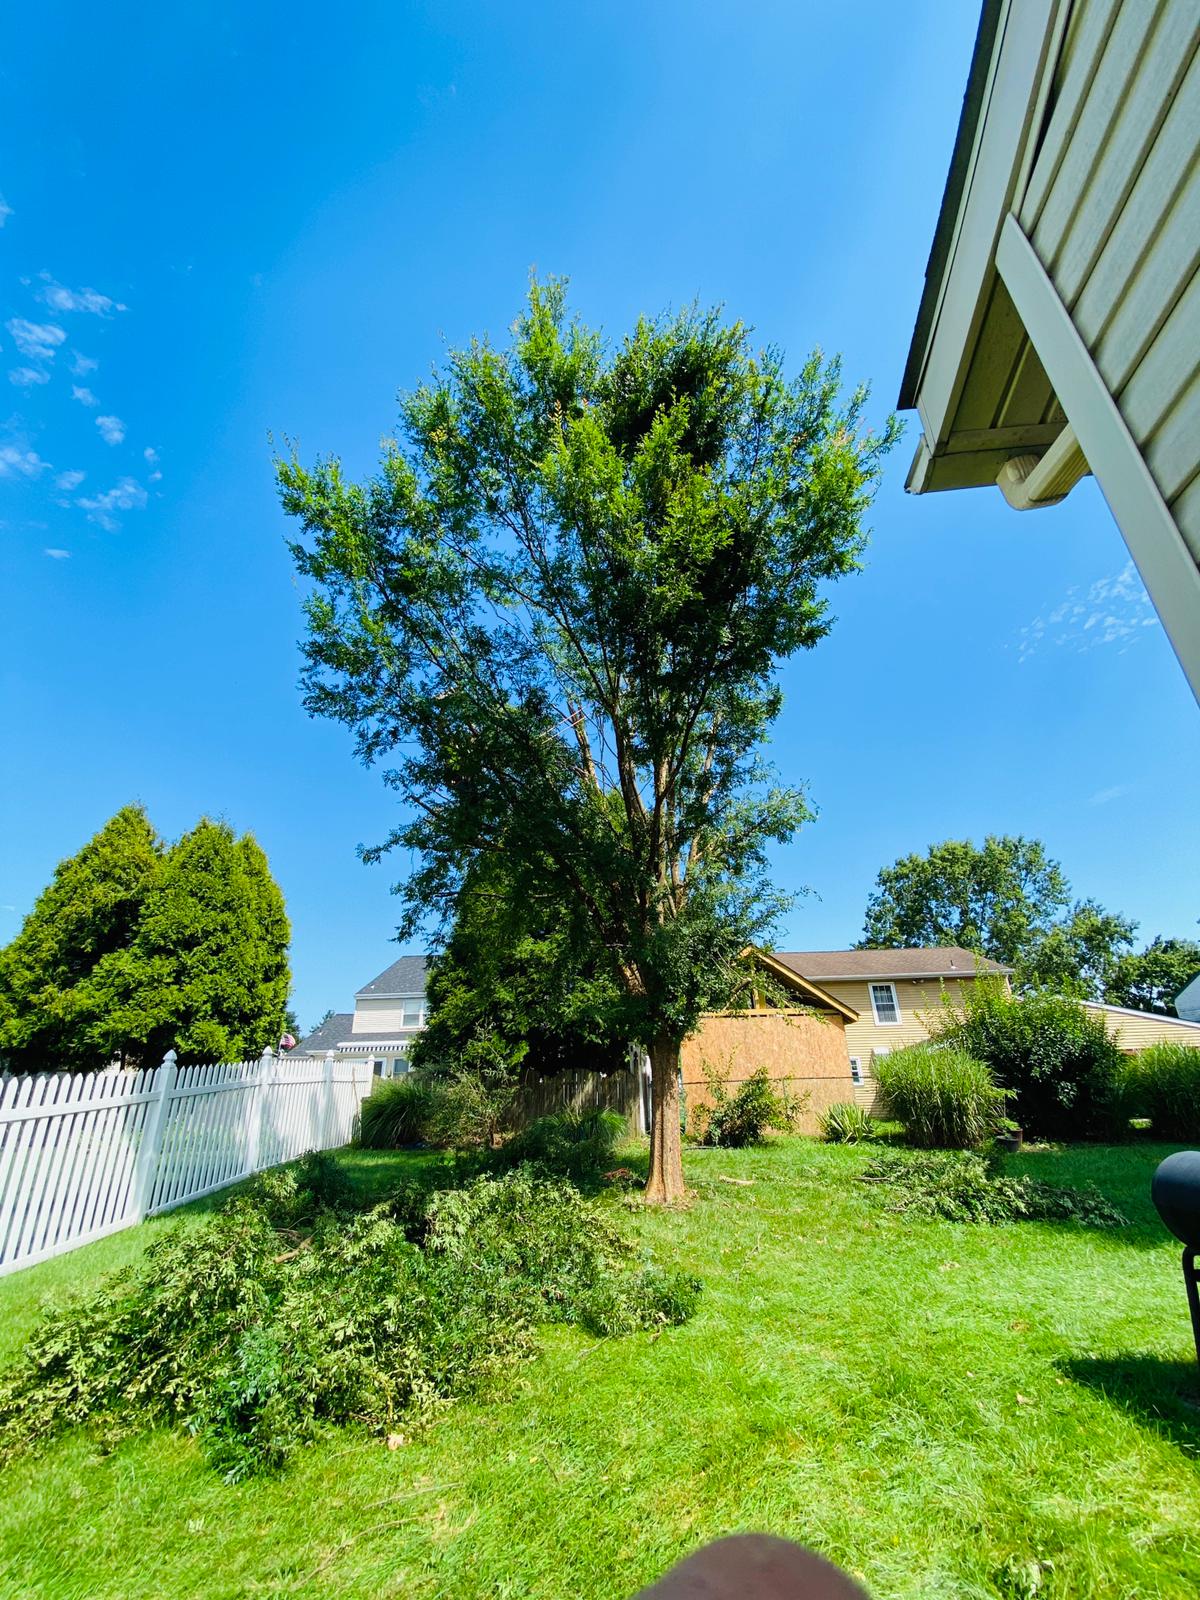 A.C. Tree Service LLC-91 Manor Dr Hagerstown, MD 21740-1-301-302-6467 (9)